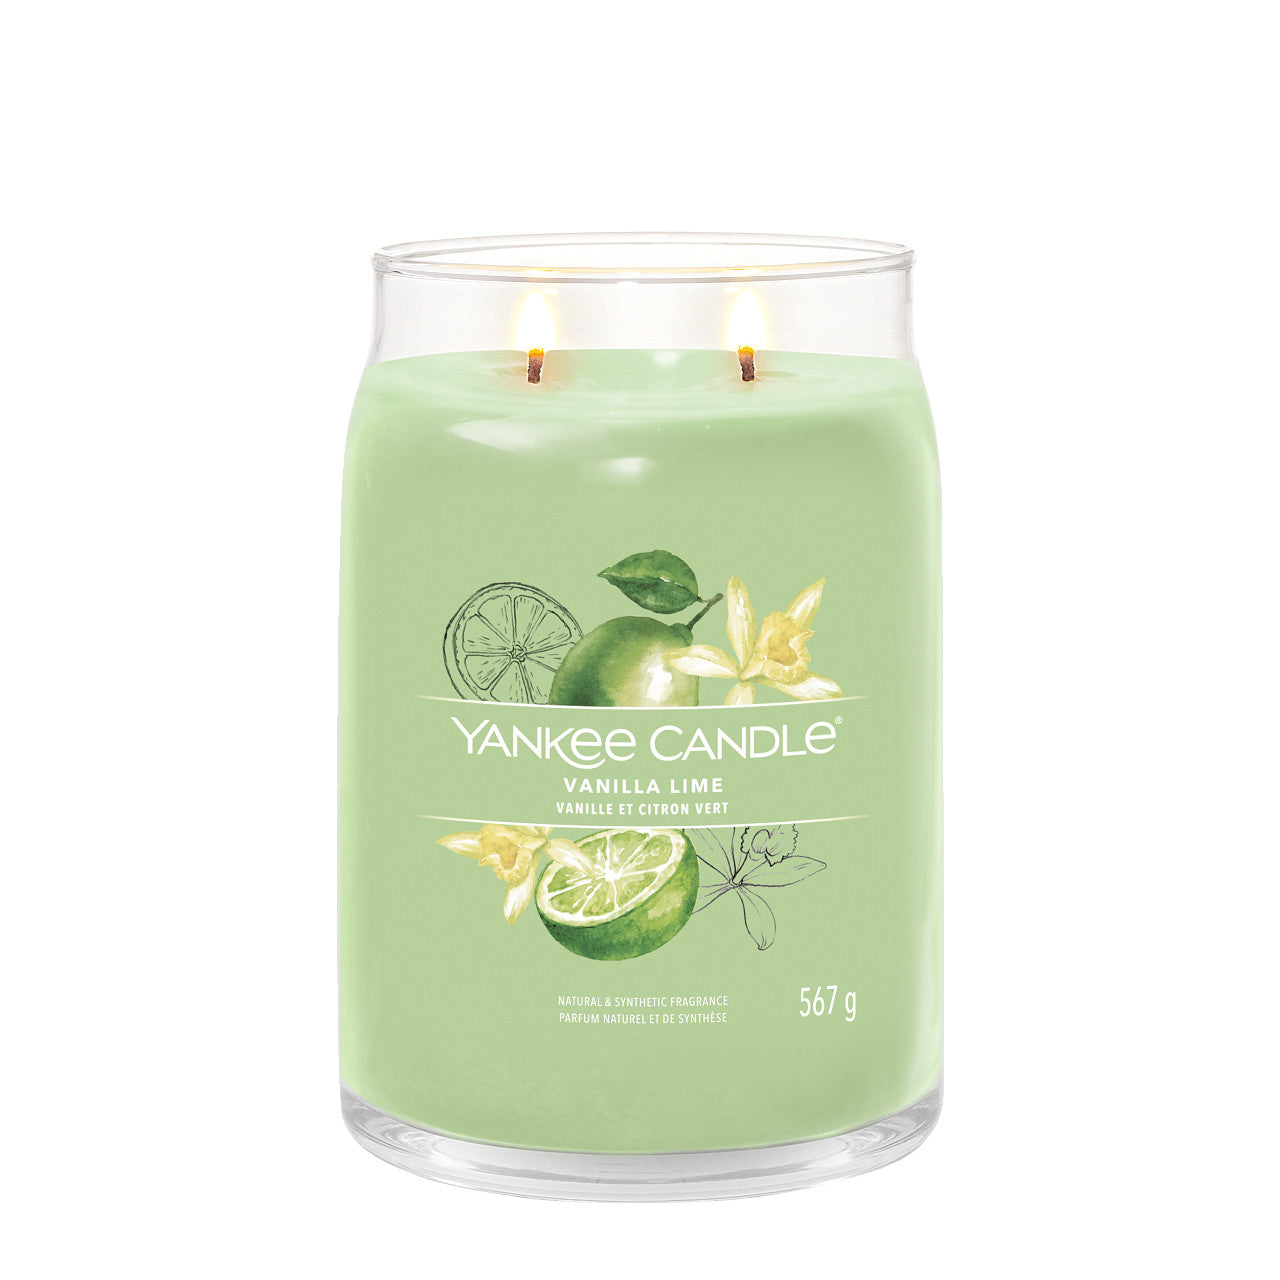 Vanilla Lime - Signature Large Jar Scented Candle